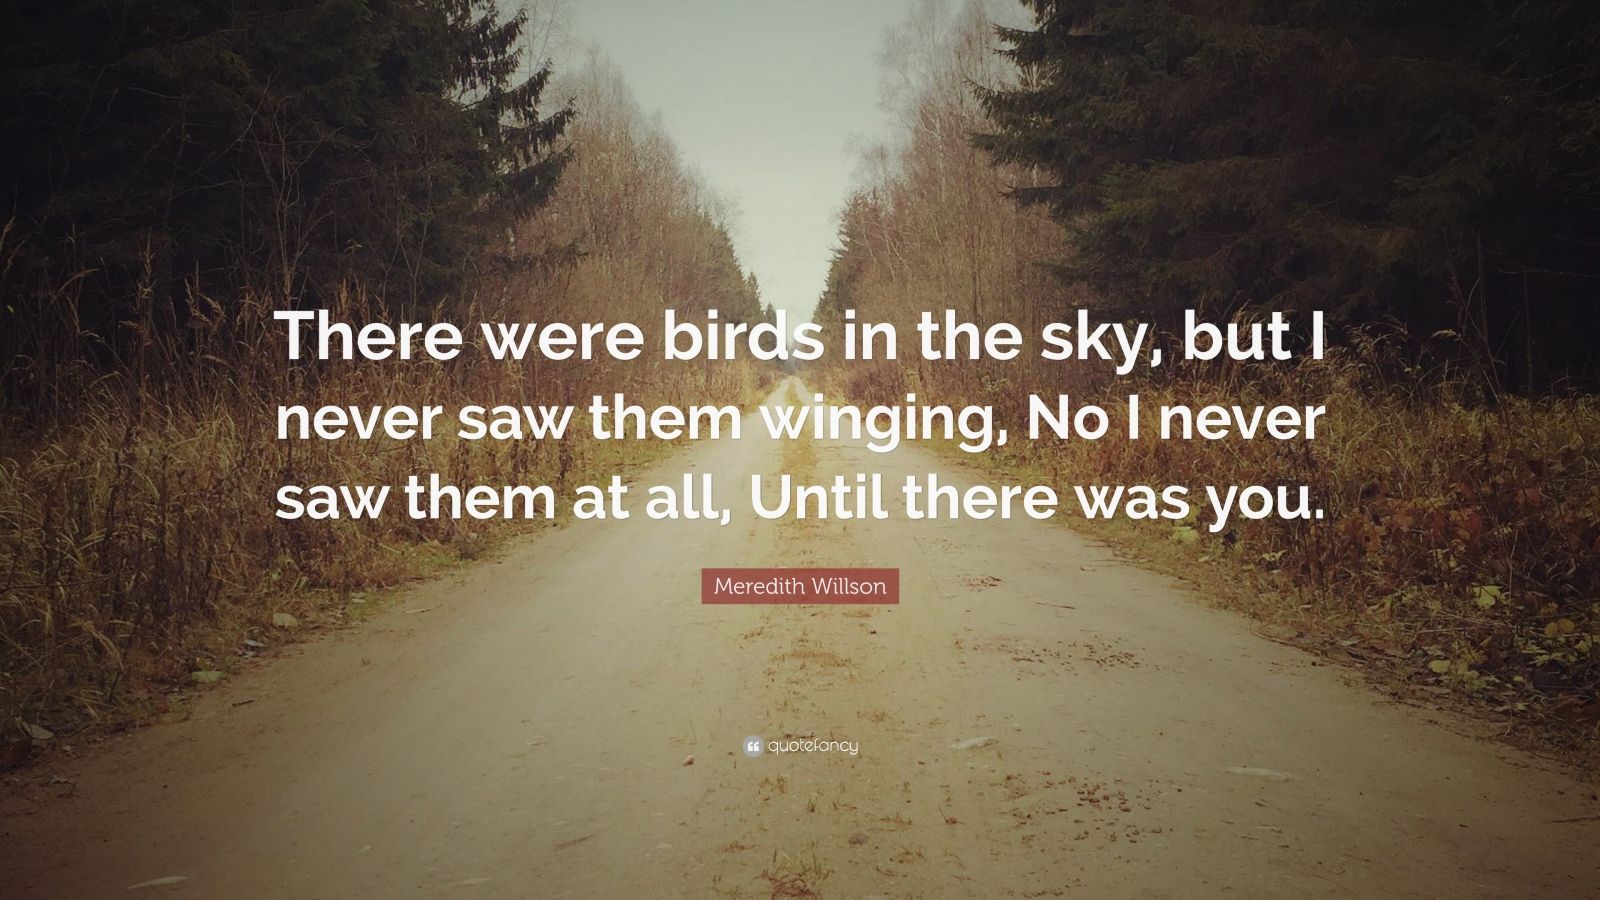 Meredith Willson Quote: “There were birds in the sky, but I never saw ...